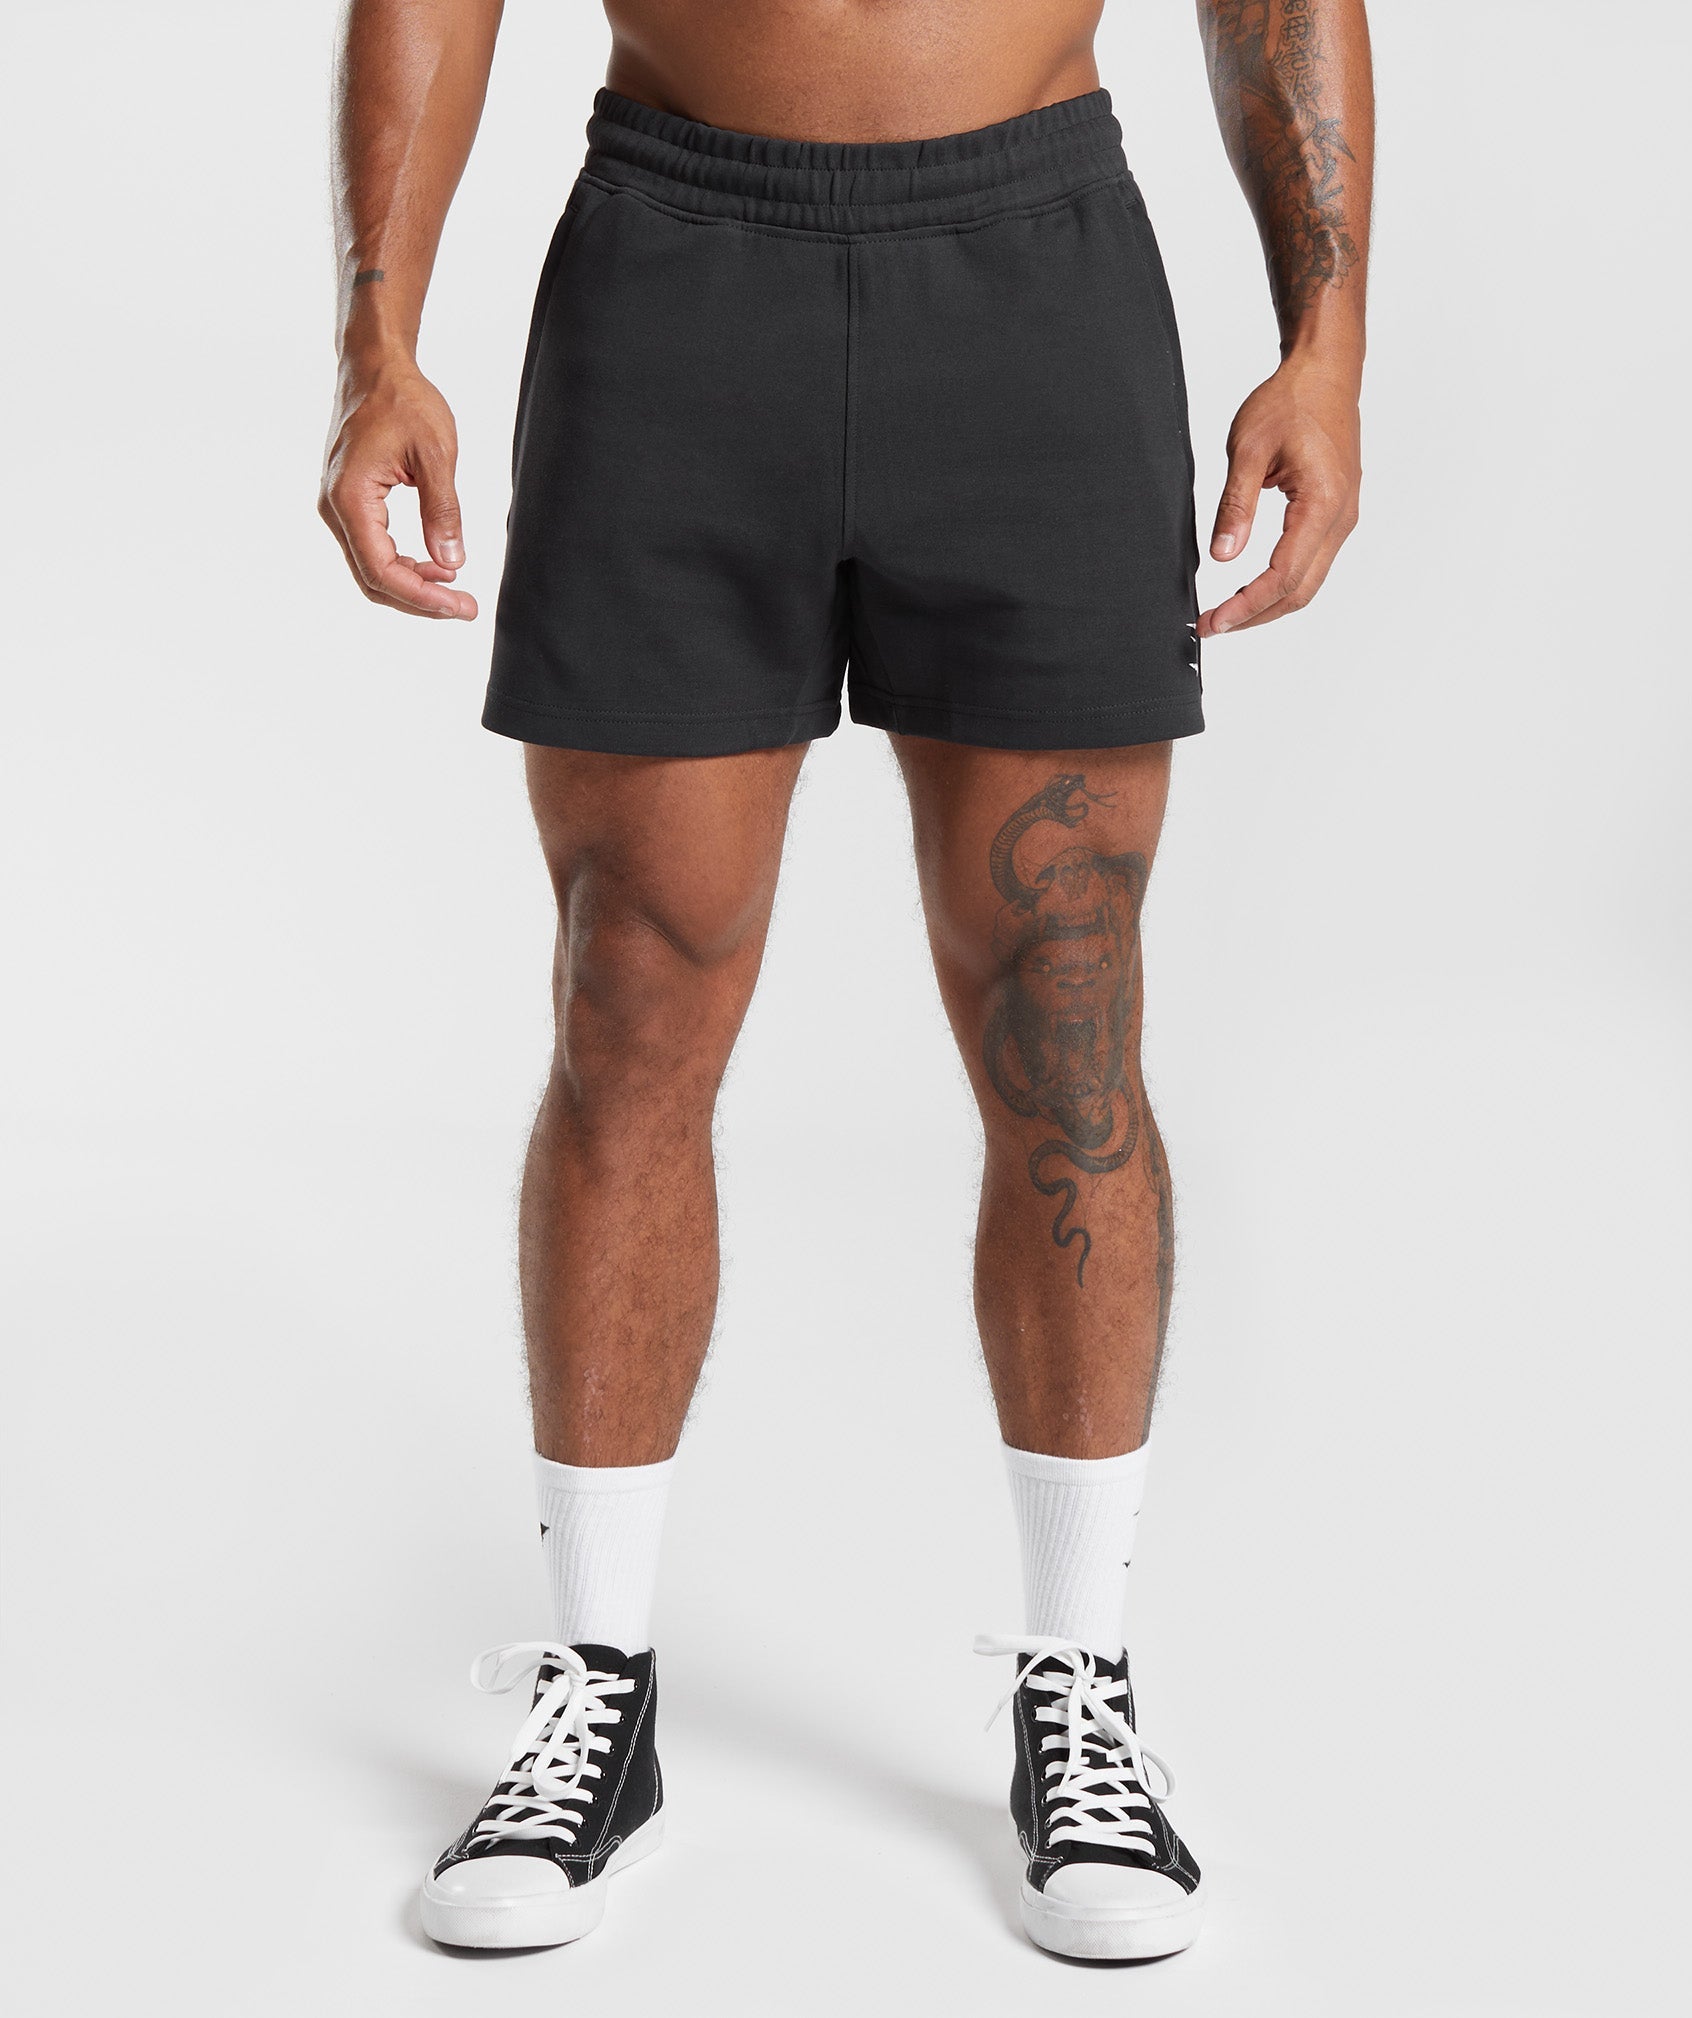 React 5" Shorts in Black - view 1